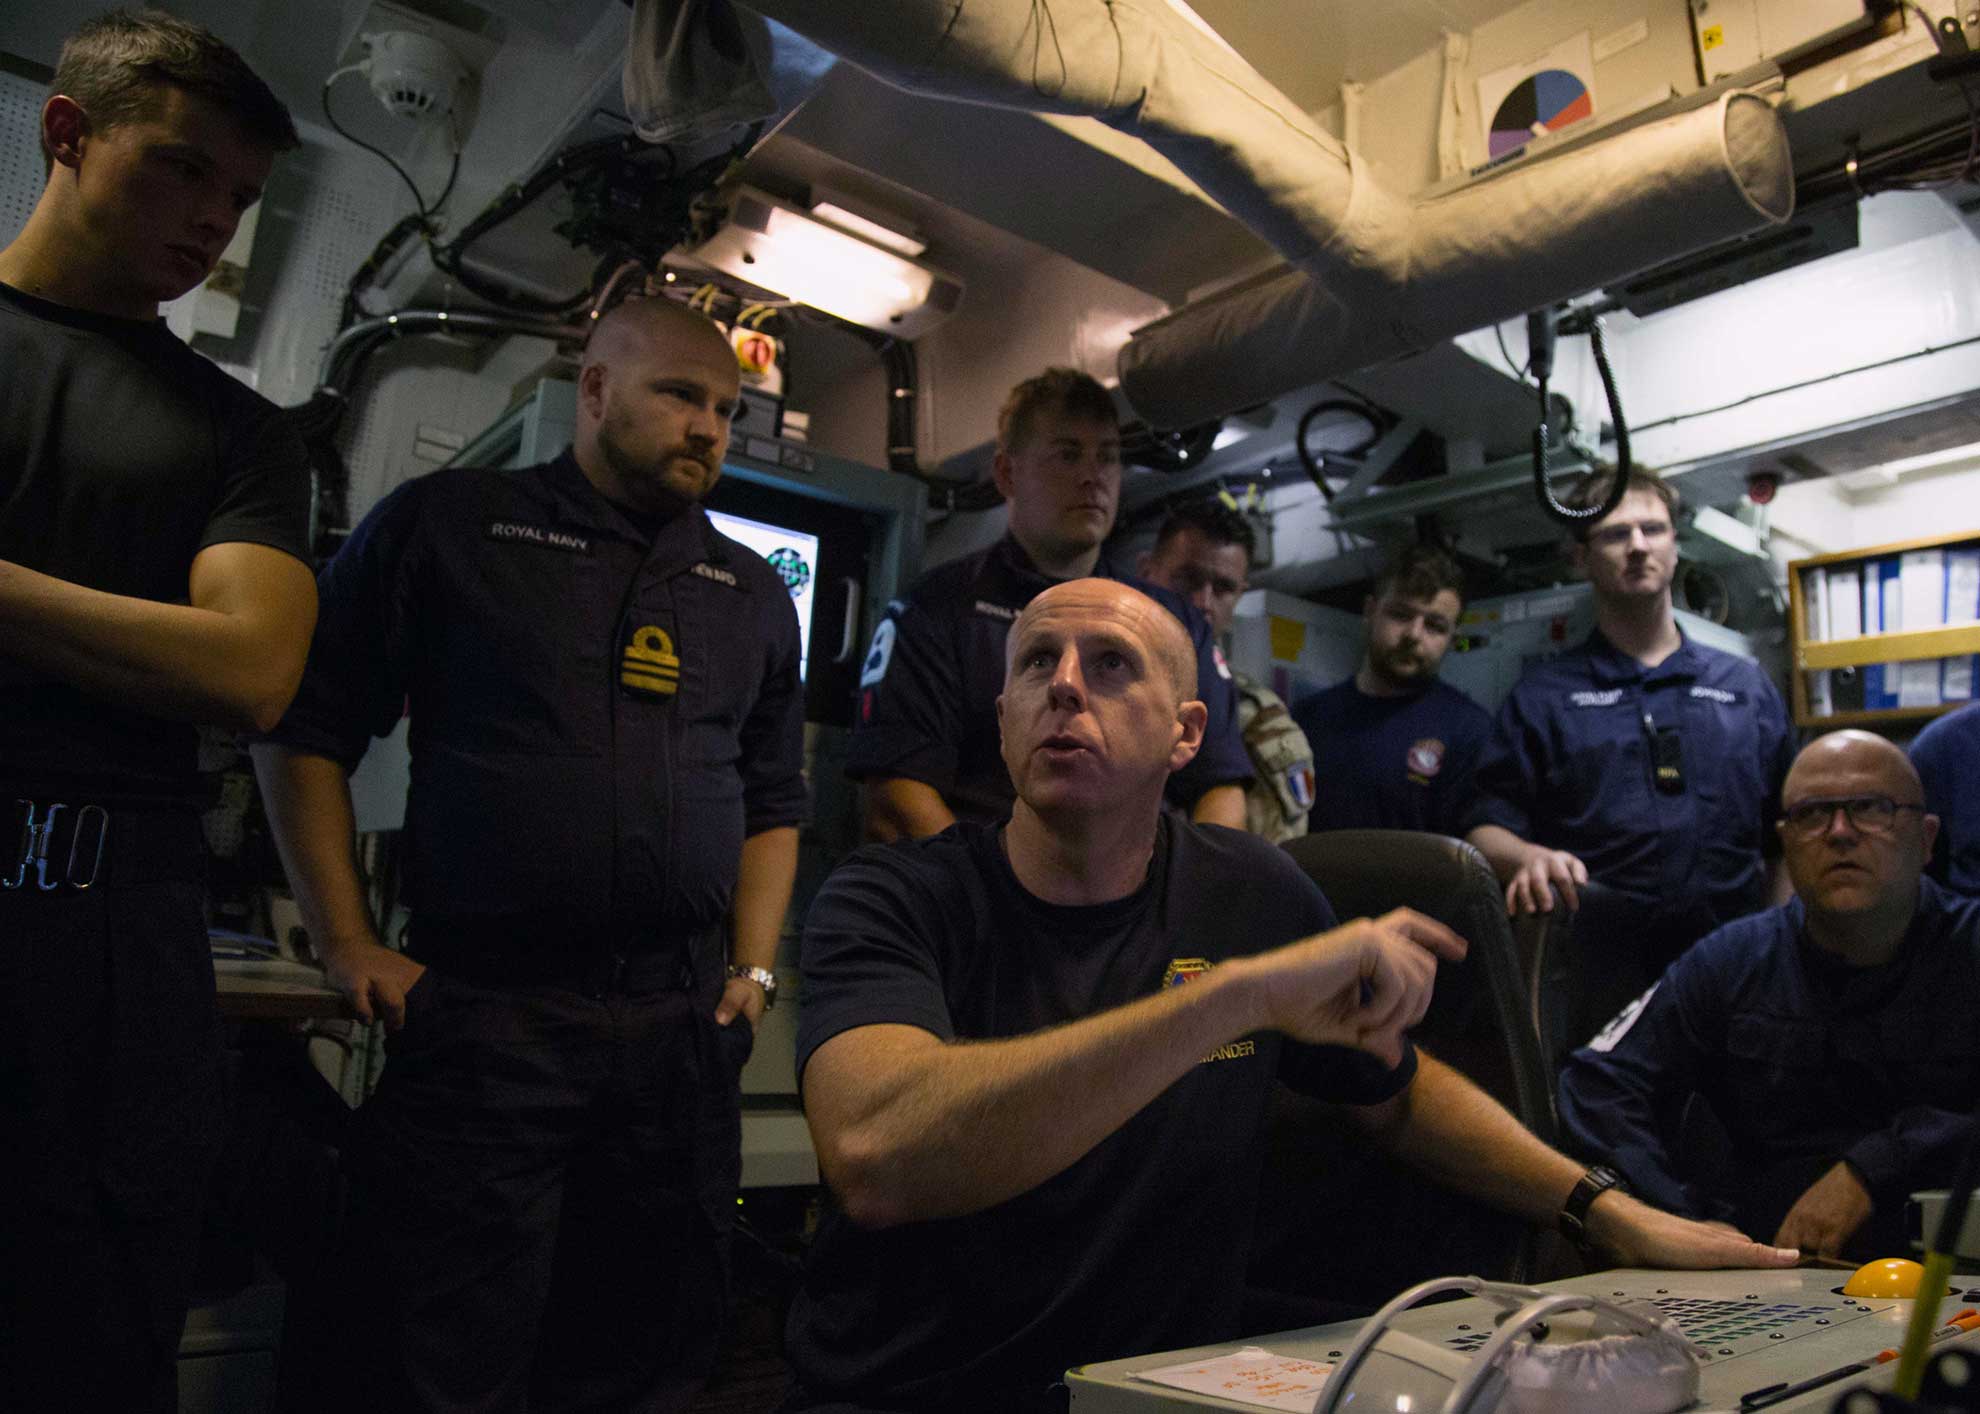 Arabian Gulf (April 13, 2019) Cmdr. Steve White, commander of Royal Navy mine countermeasure forces deployed to the Arabian Gulf, speaks to the crew of the Royal Navy minehunter HMS Ledbury (M30) during a command update aboard the Ledbury during Artemis Trident 19. Artemis Trident is a mine counter-measures exercise conducted by France's Marine Nationale, the United Kingdom's Royal Navy and the U.S. Navy in the Arabian Gulf focused on increasing interoperability and demonstrating the nations' shared commitment to ensuring unfettered maritime operations -- U.S. Army photo by Sgt. Sidney Weston. -